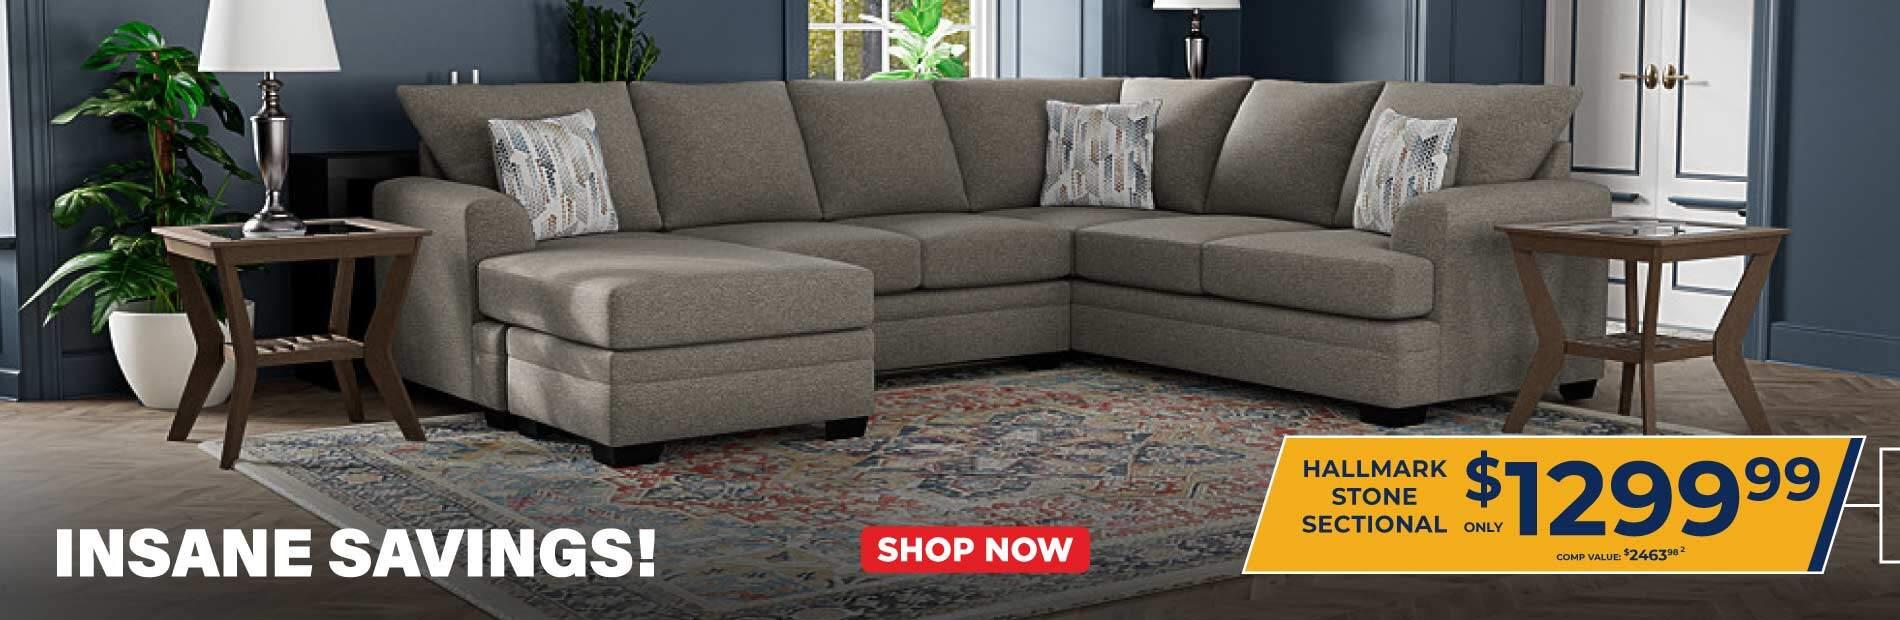 Insane Savings! Hallmark Stone Sectional Only $1,299.99 Comp Value 2463.98. 2. Shop now!